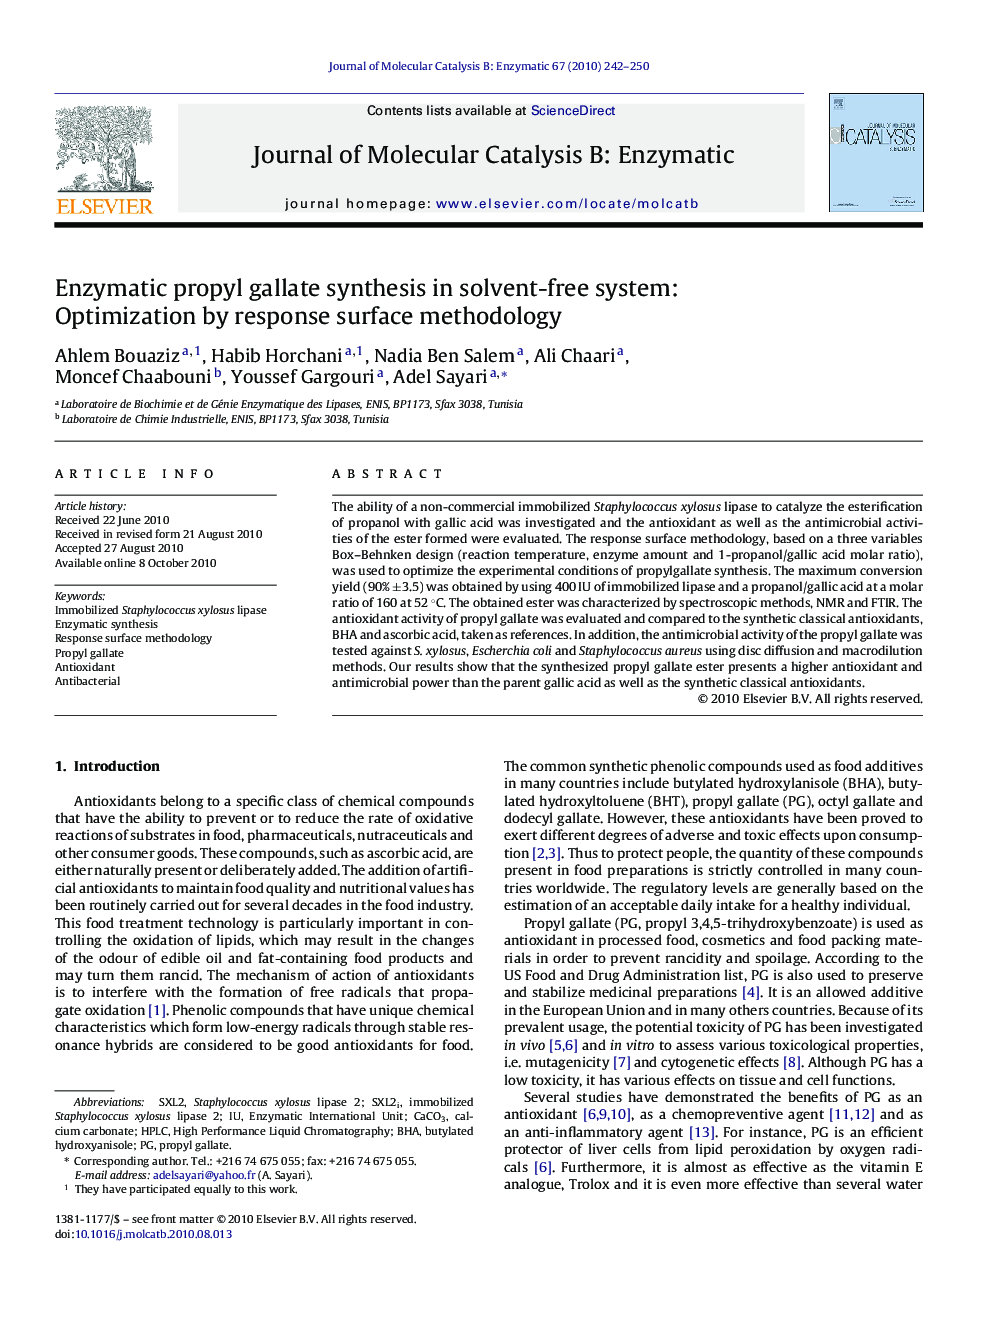 Enzymatic propyl gallate synthesis in solvent-free system: Optimization by response surface methodology